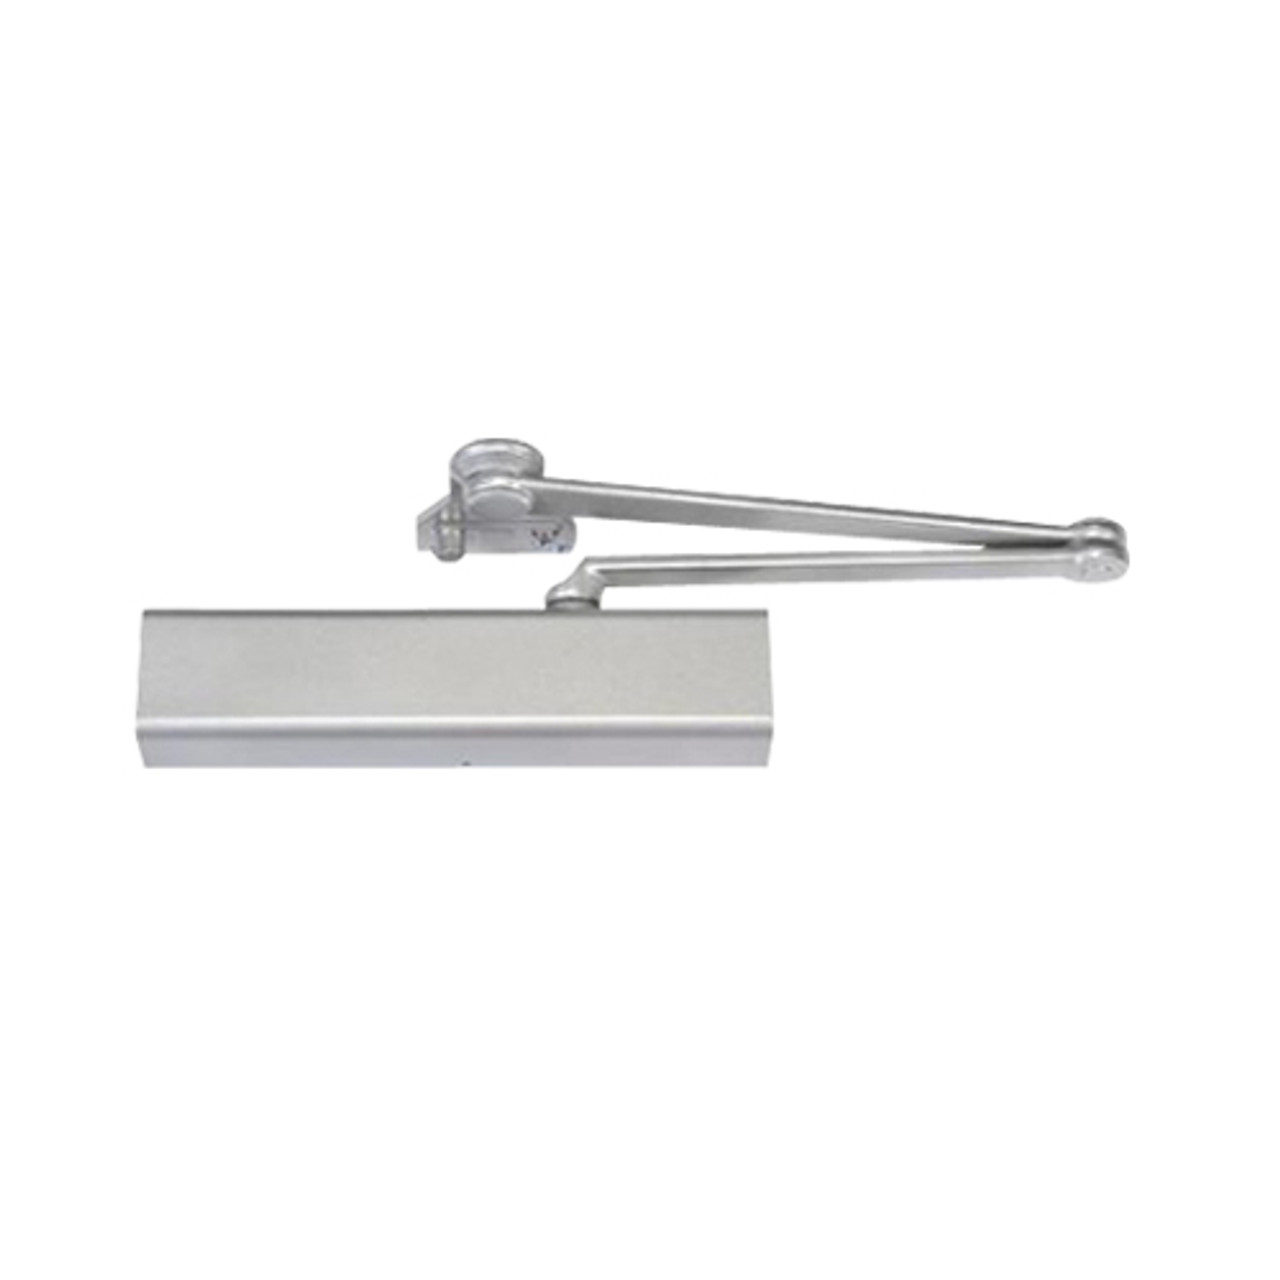 CLP8501-689 Norton 8000 Series Full Cover Non-Hold Open Door Closers with CloserPlus Arm in Aluminum Finish